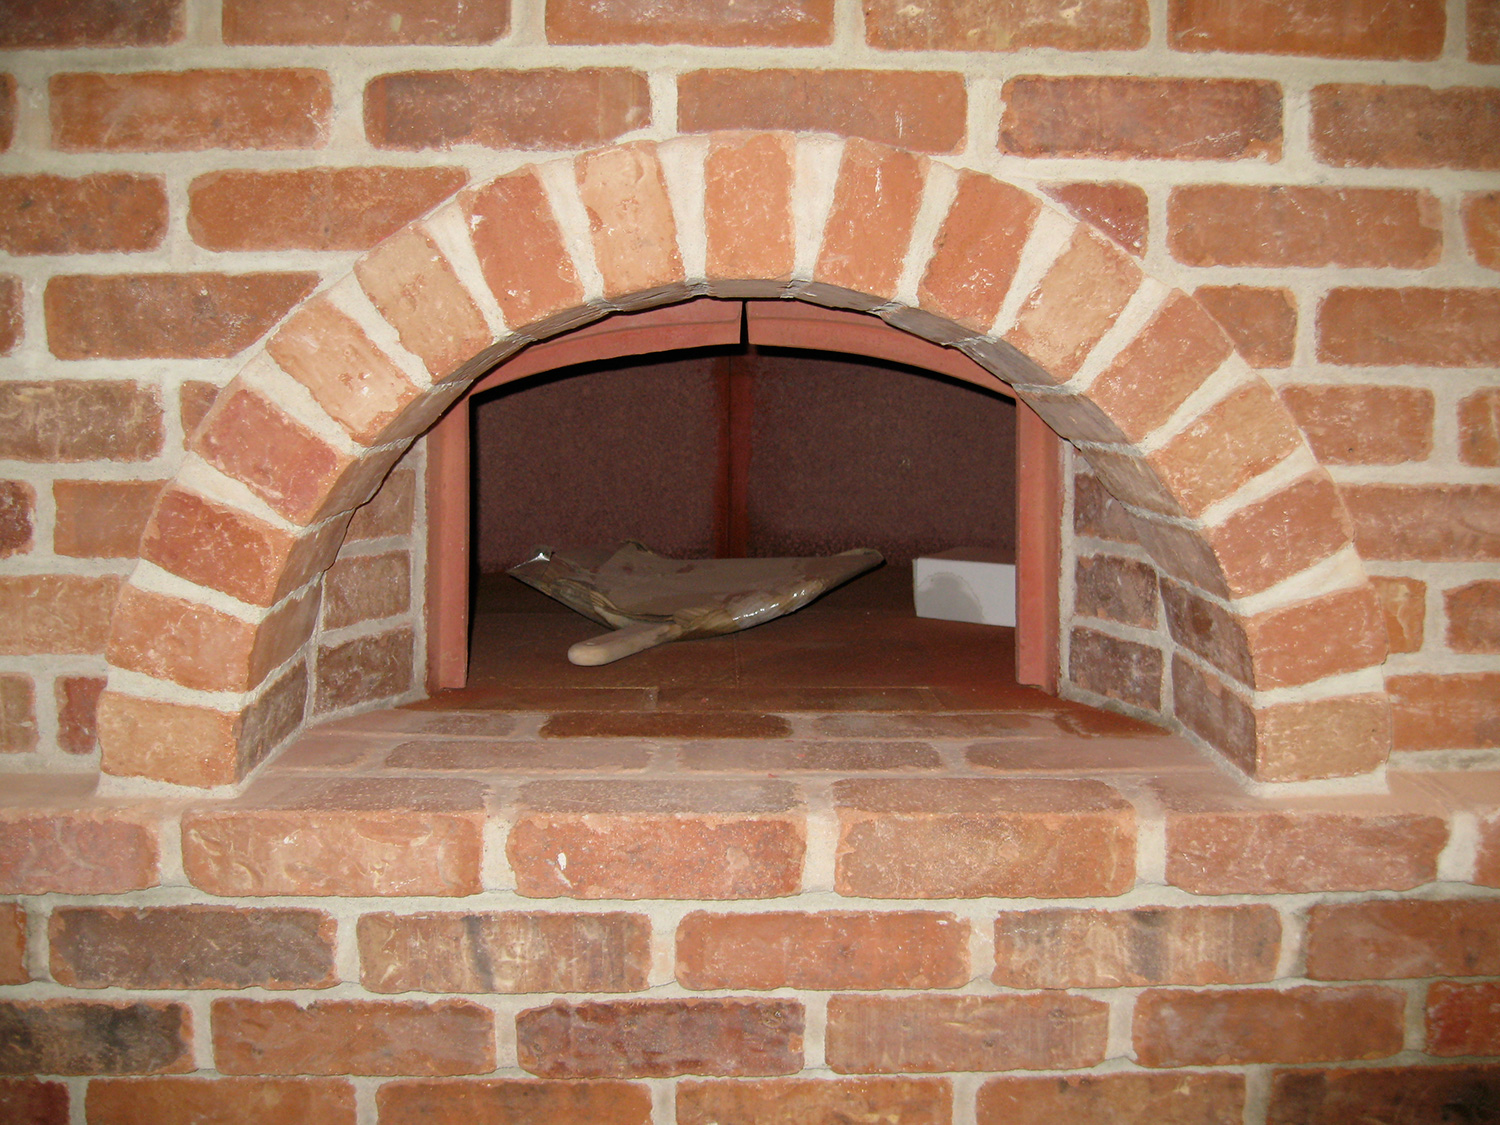 Custom pizza oven for a great kitchen feature. Gallatin, NY.